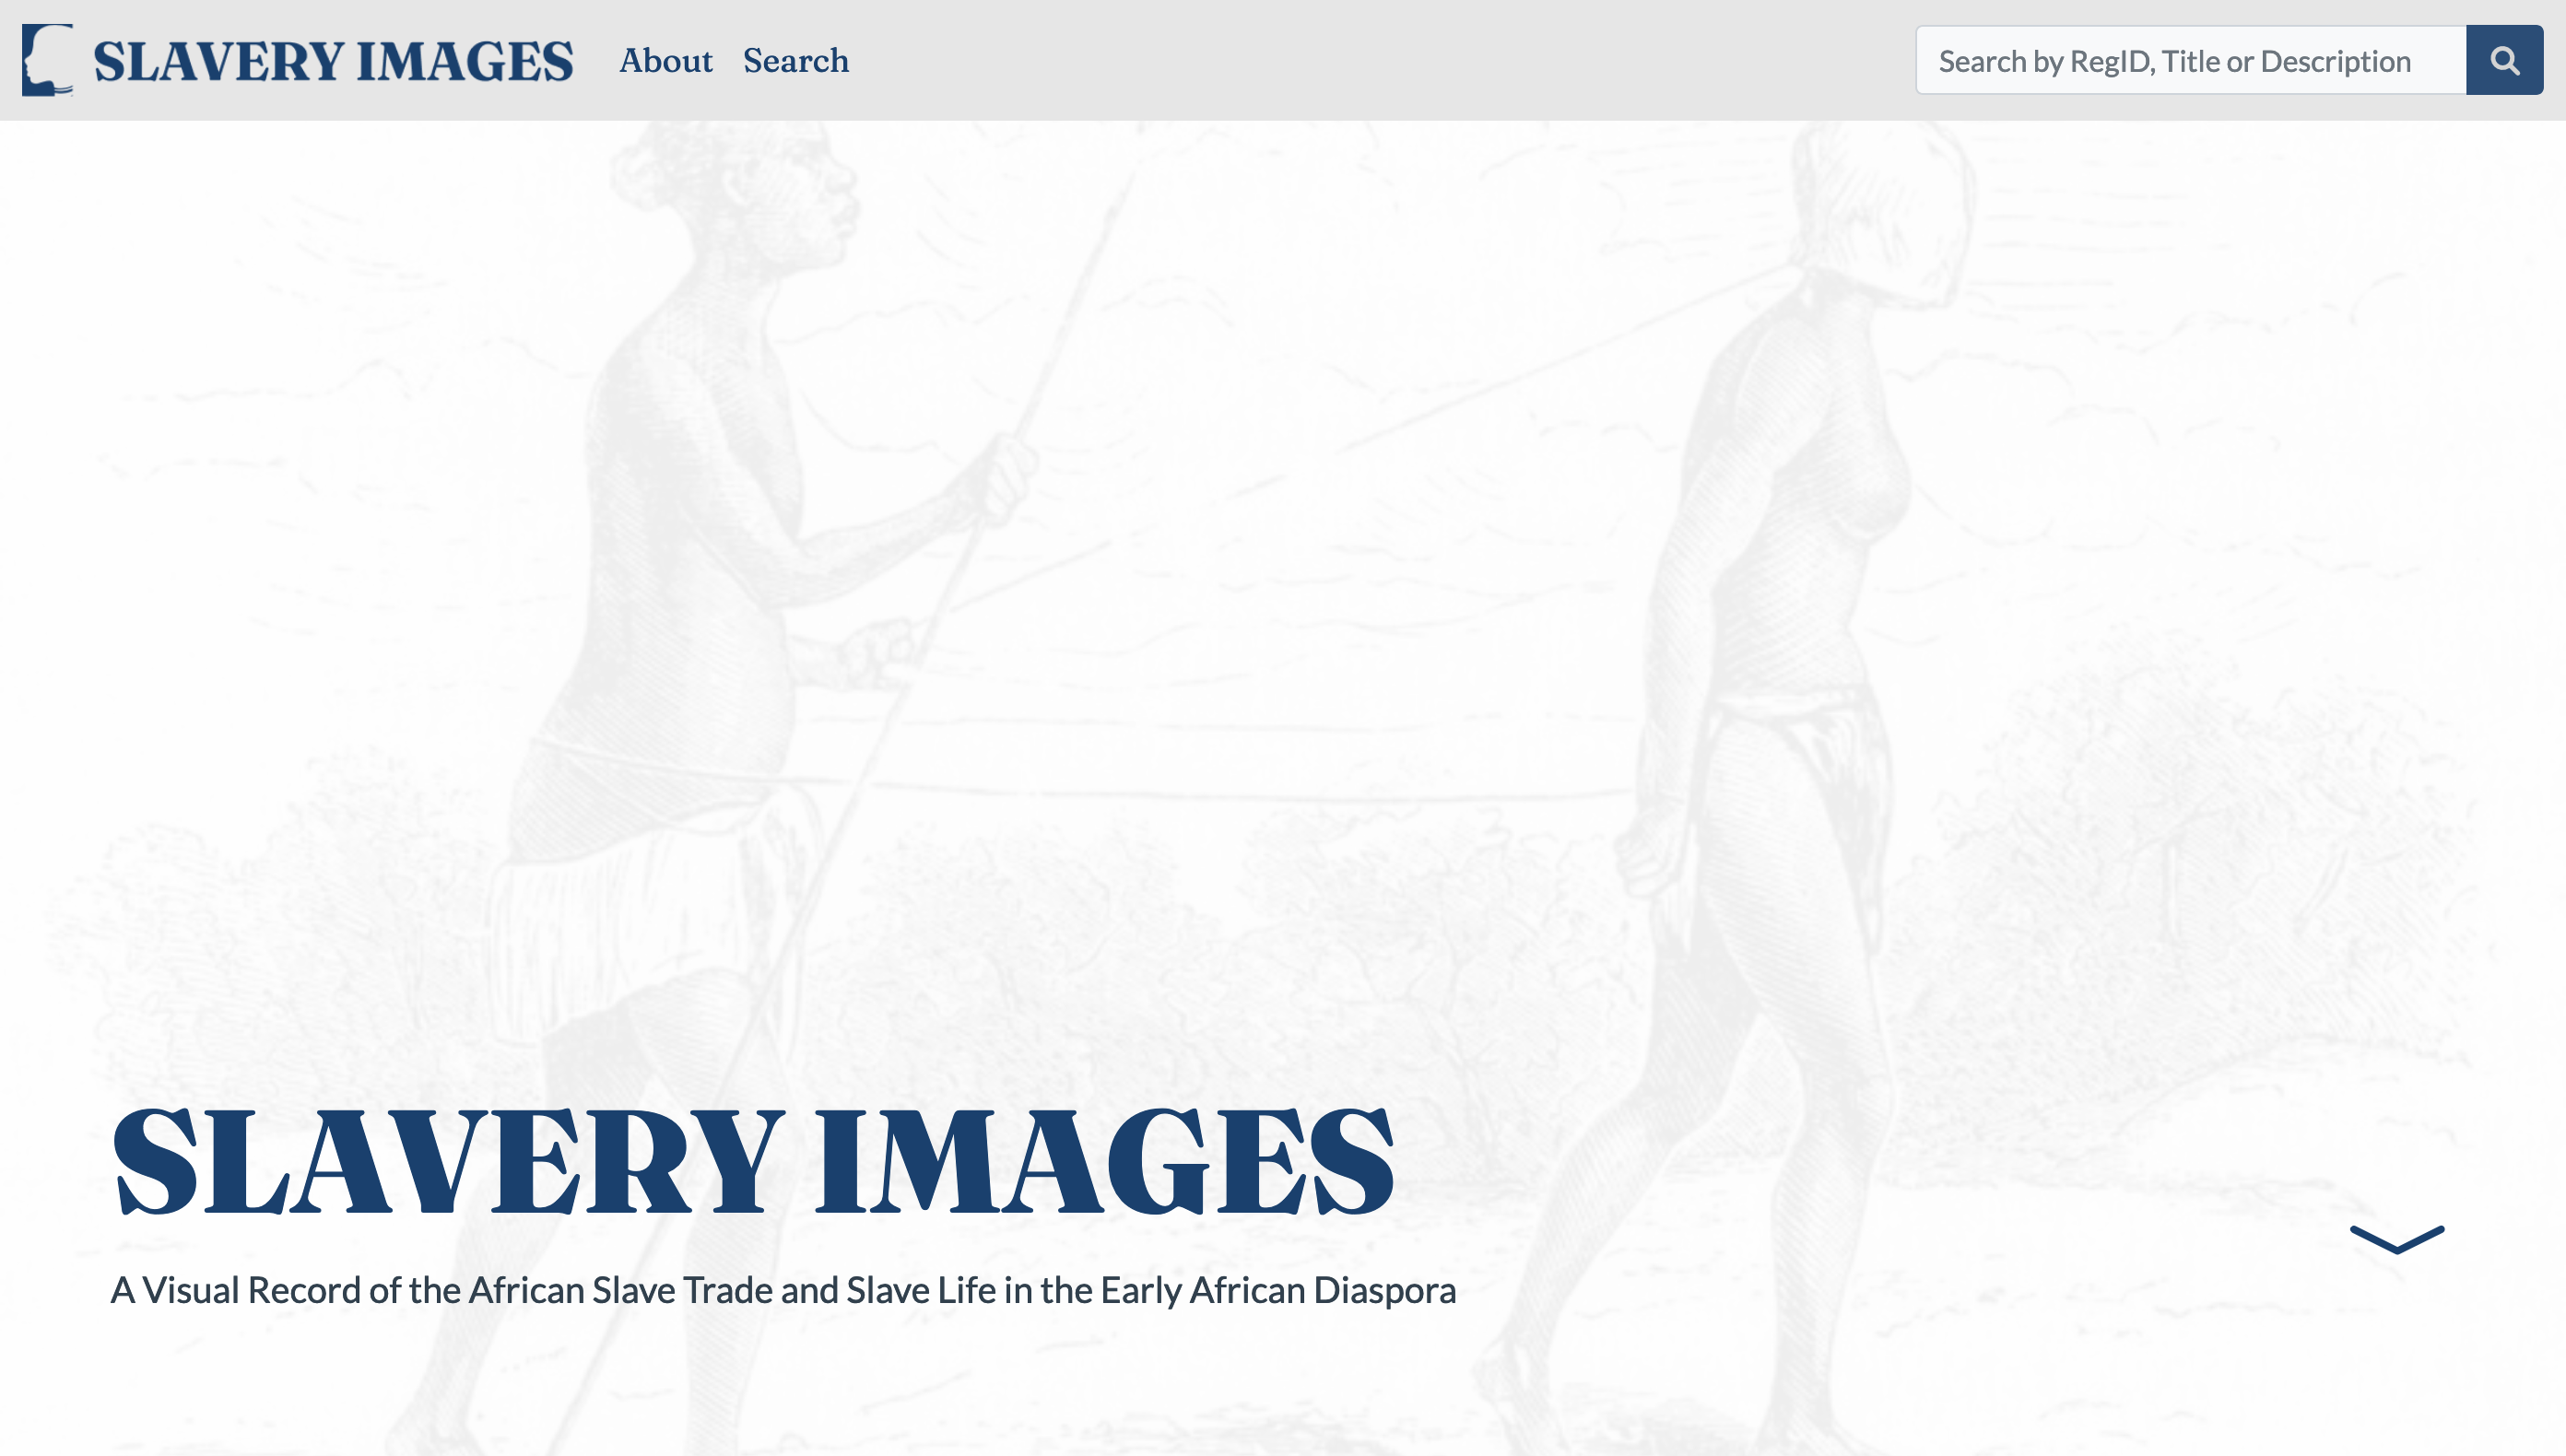 Slavery Images. A Visual Record of the African Slave Trade and Slave Life in the Early African Diaspora